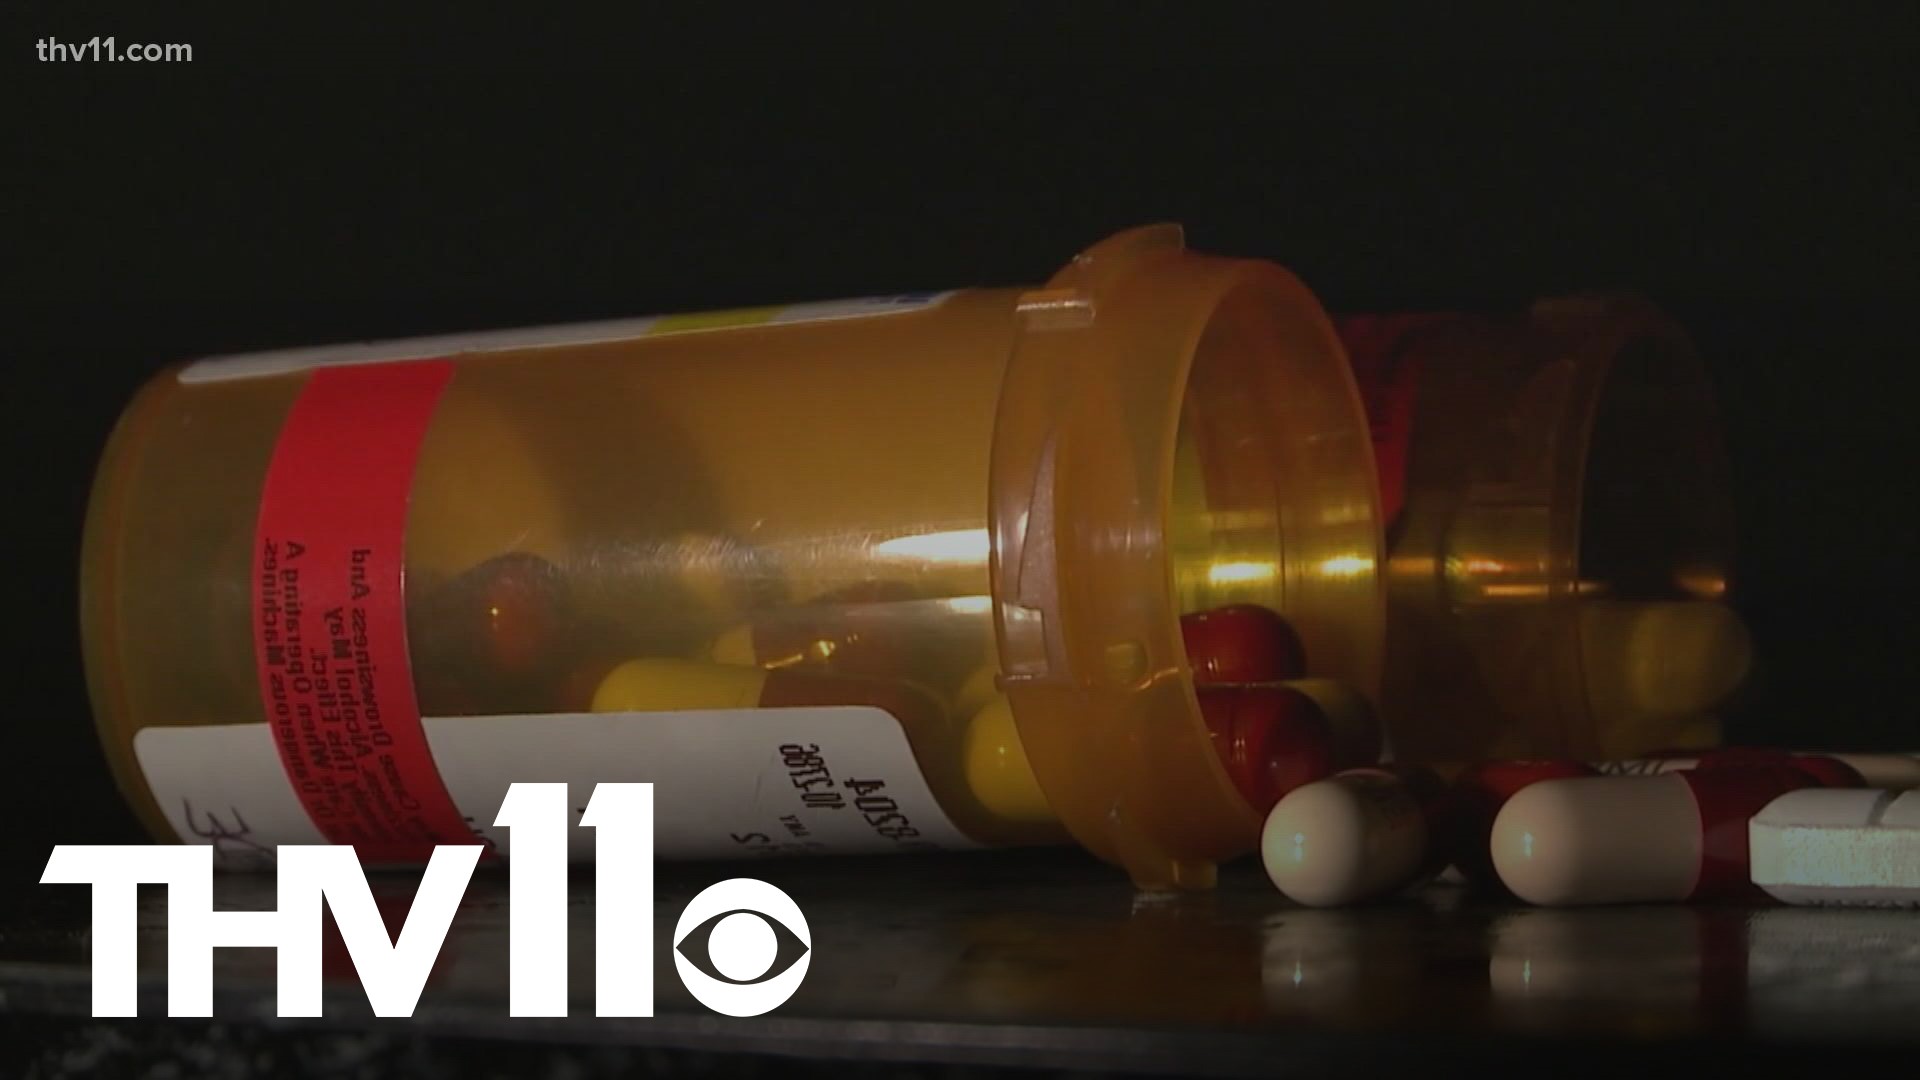 The Arkansas Department of Health teamed up with Arkansas PBS to release a documentary called, 7 Days: The Opioid Crisis in Arkansas.